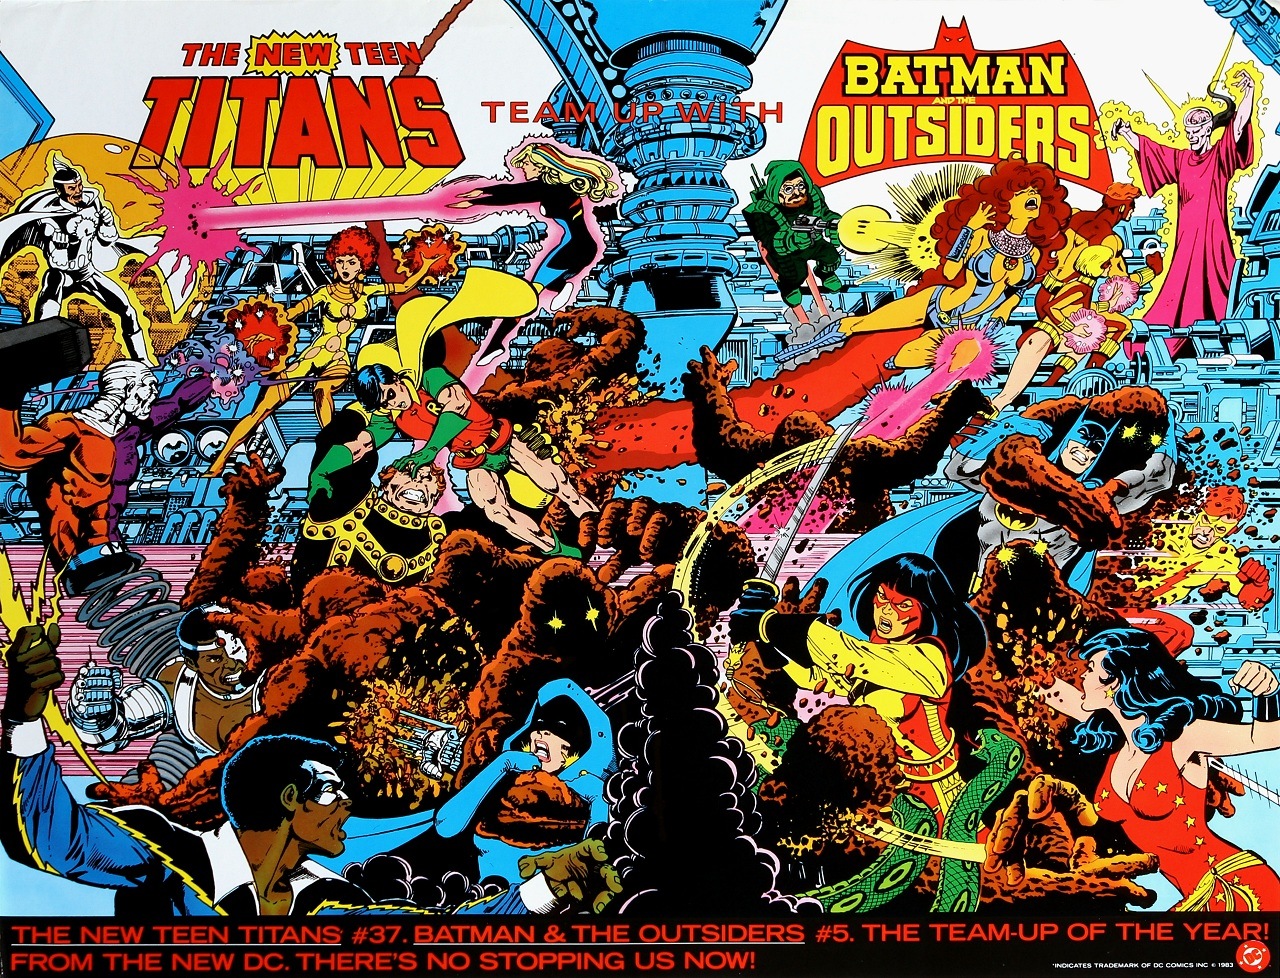 [The_New_Teen_Titans_Team_up_with_Batman_and_the_Outsiders[2].jpg]